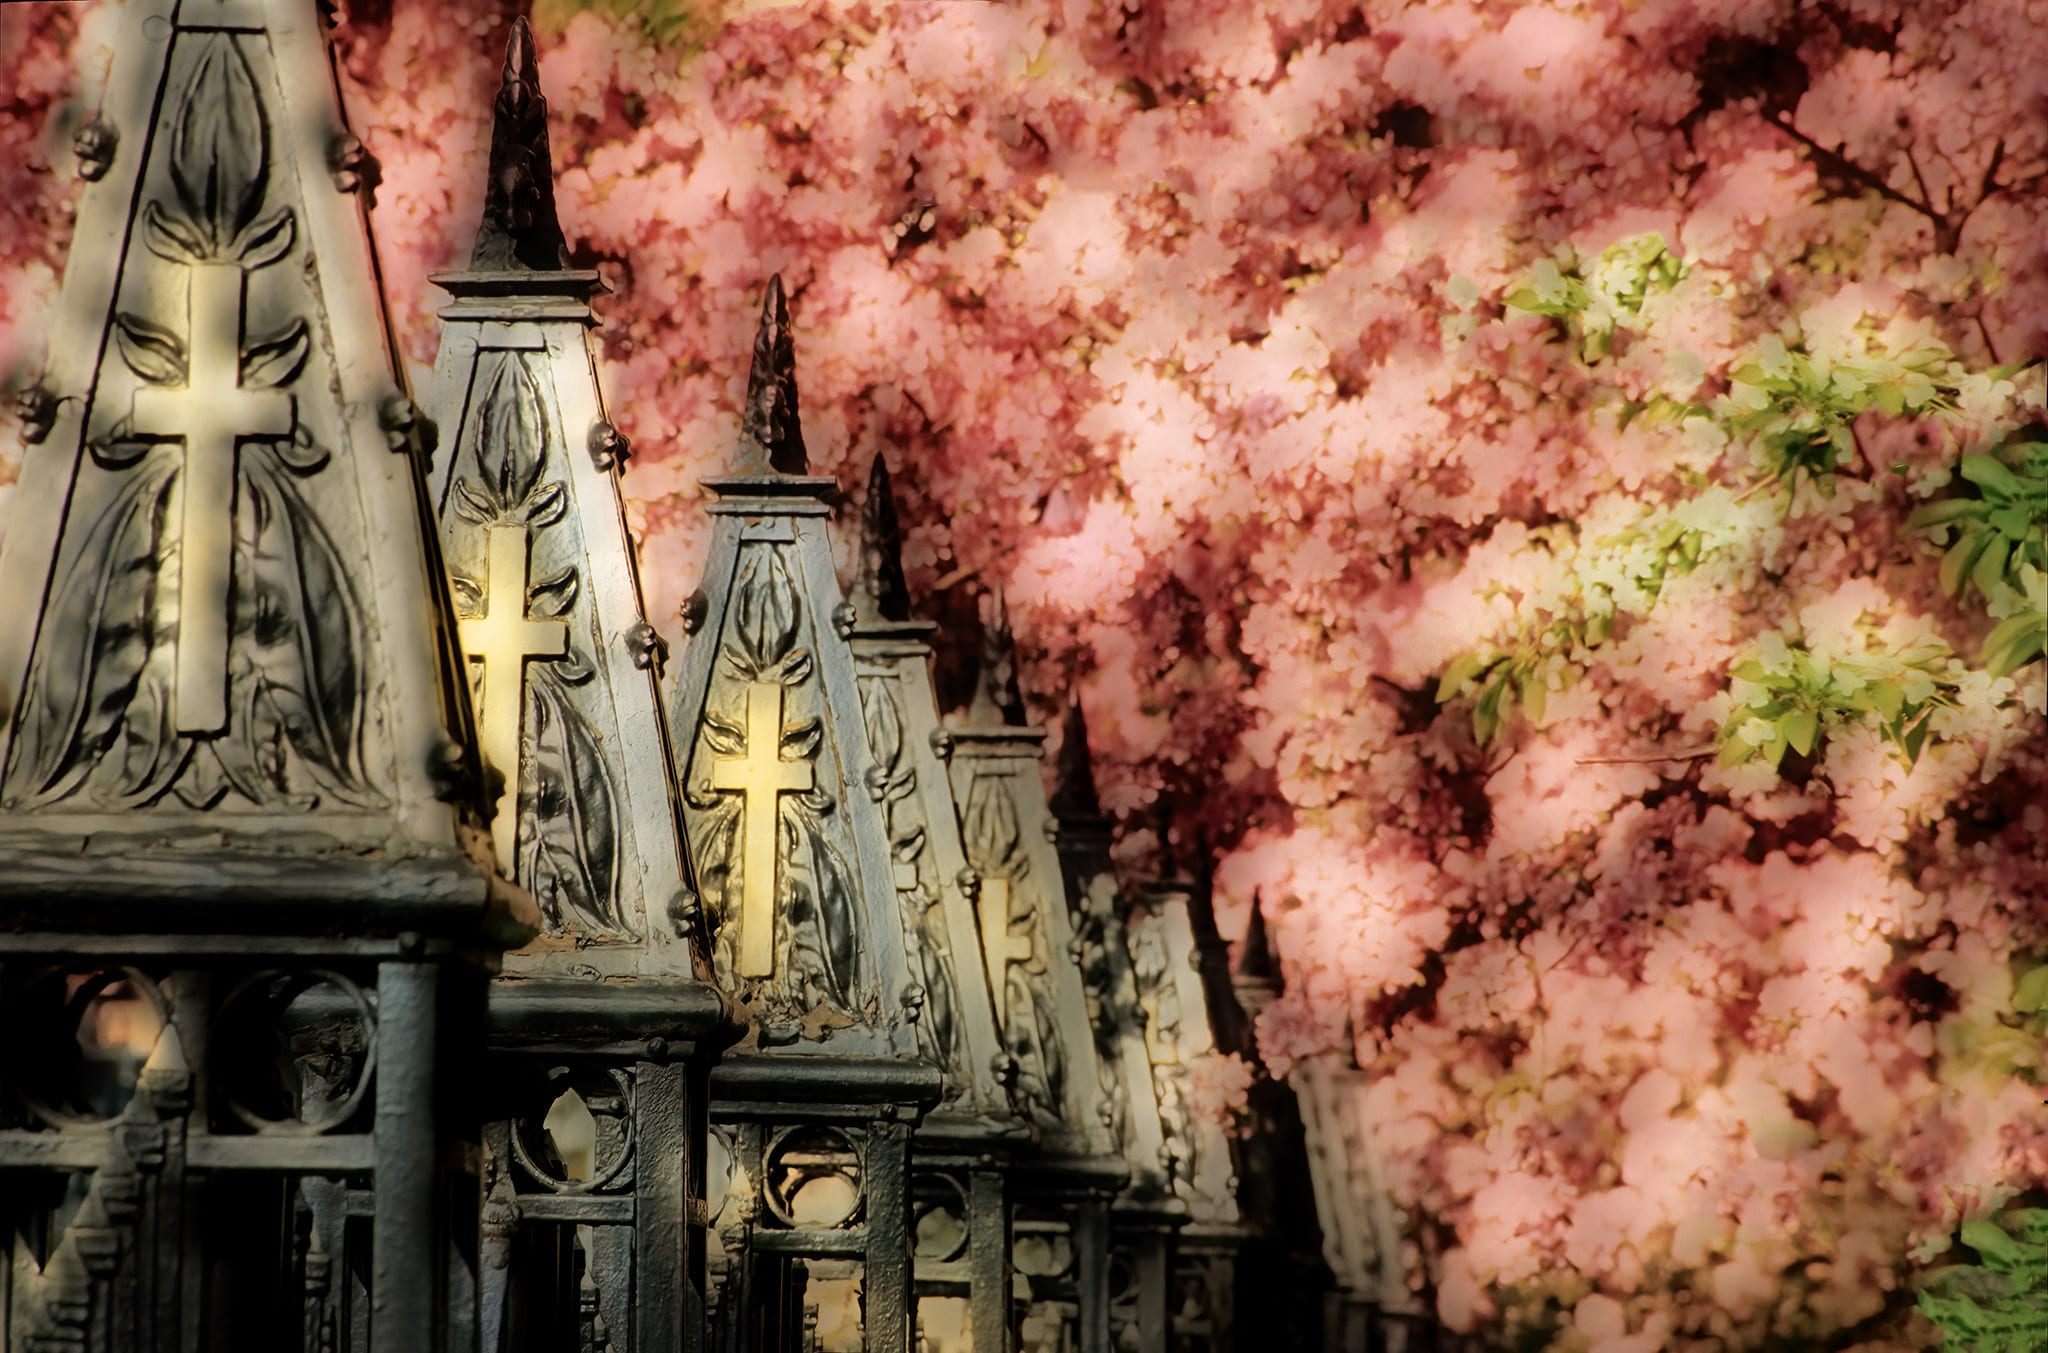 Gothic Iron fence and cherry blossoms in spring at St. Michaels’s Cathedral Basillica, Toronto, Ontario, Canada